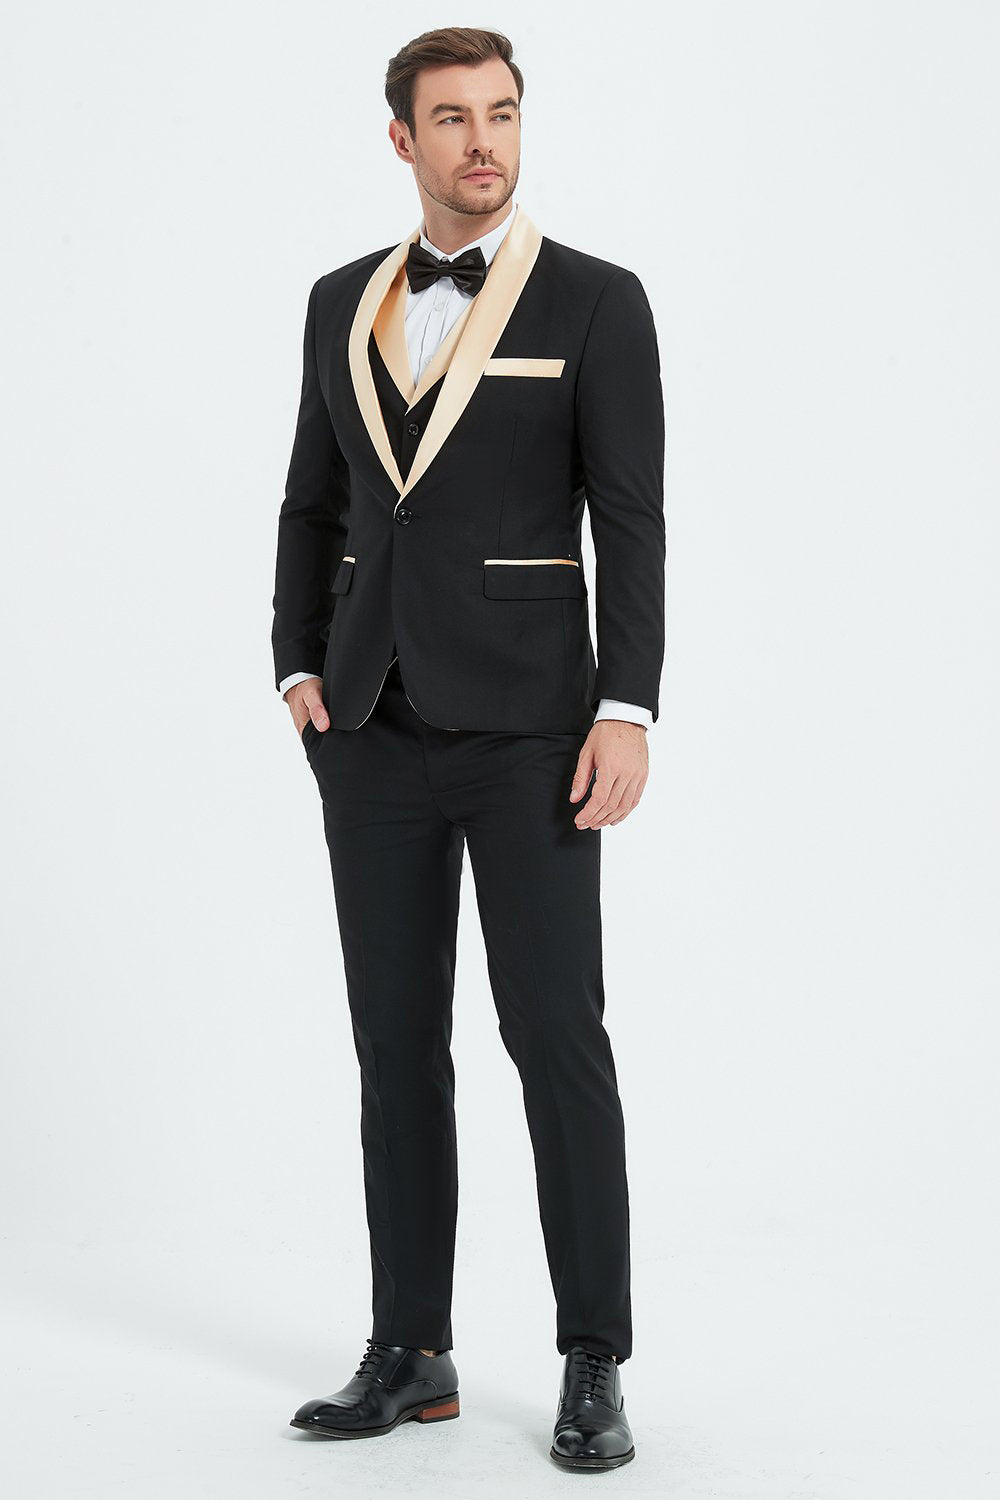 Black and Champagne 3 Piece Shawl Lapel Men's Formal Suits